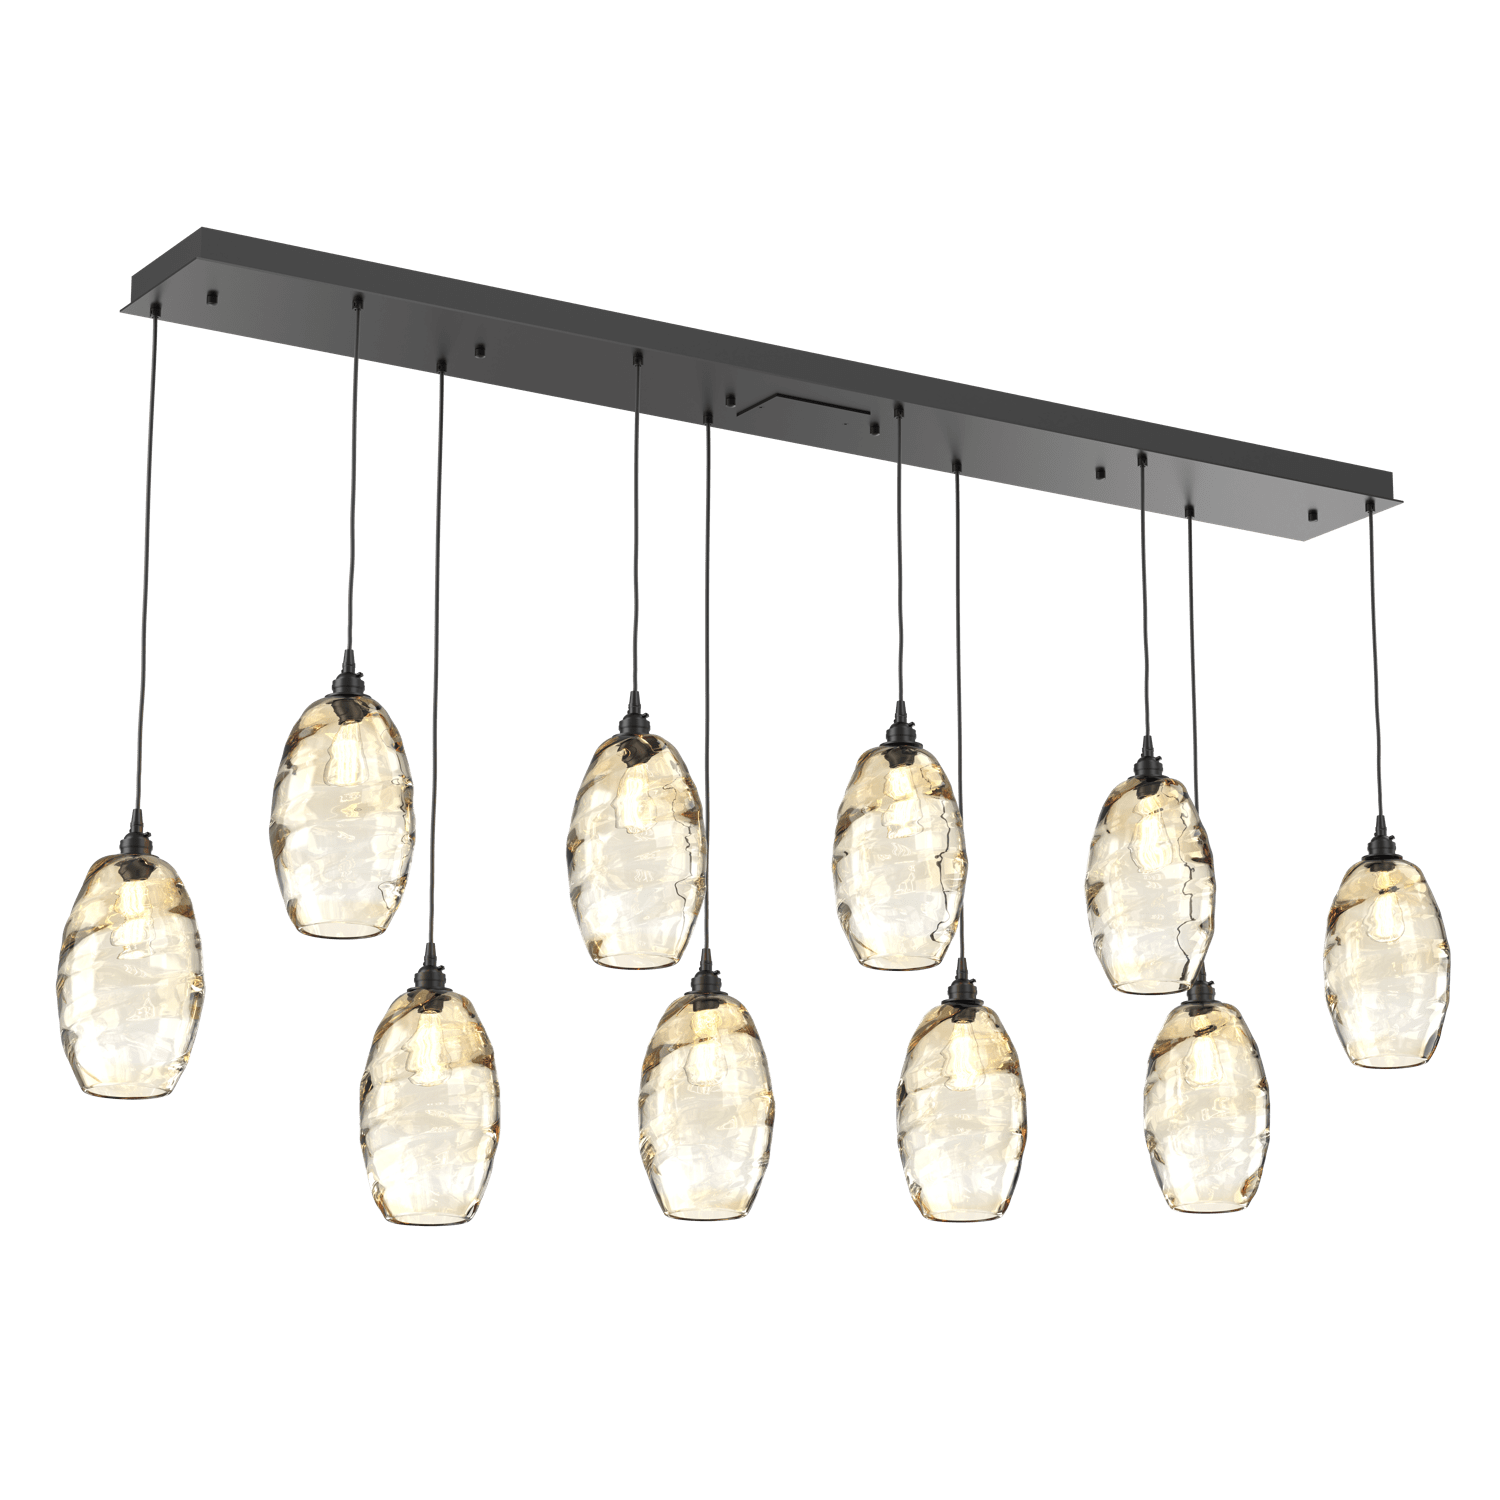 PLB0035-10-MB-OA-Hammerton-Studio-Optic-Blown-Glass-Elisse-10-light-linear-pendant-chandelier-with-matte-black-finish-and-optic-amber-blown-glass-shades-and-incandescent-lamping